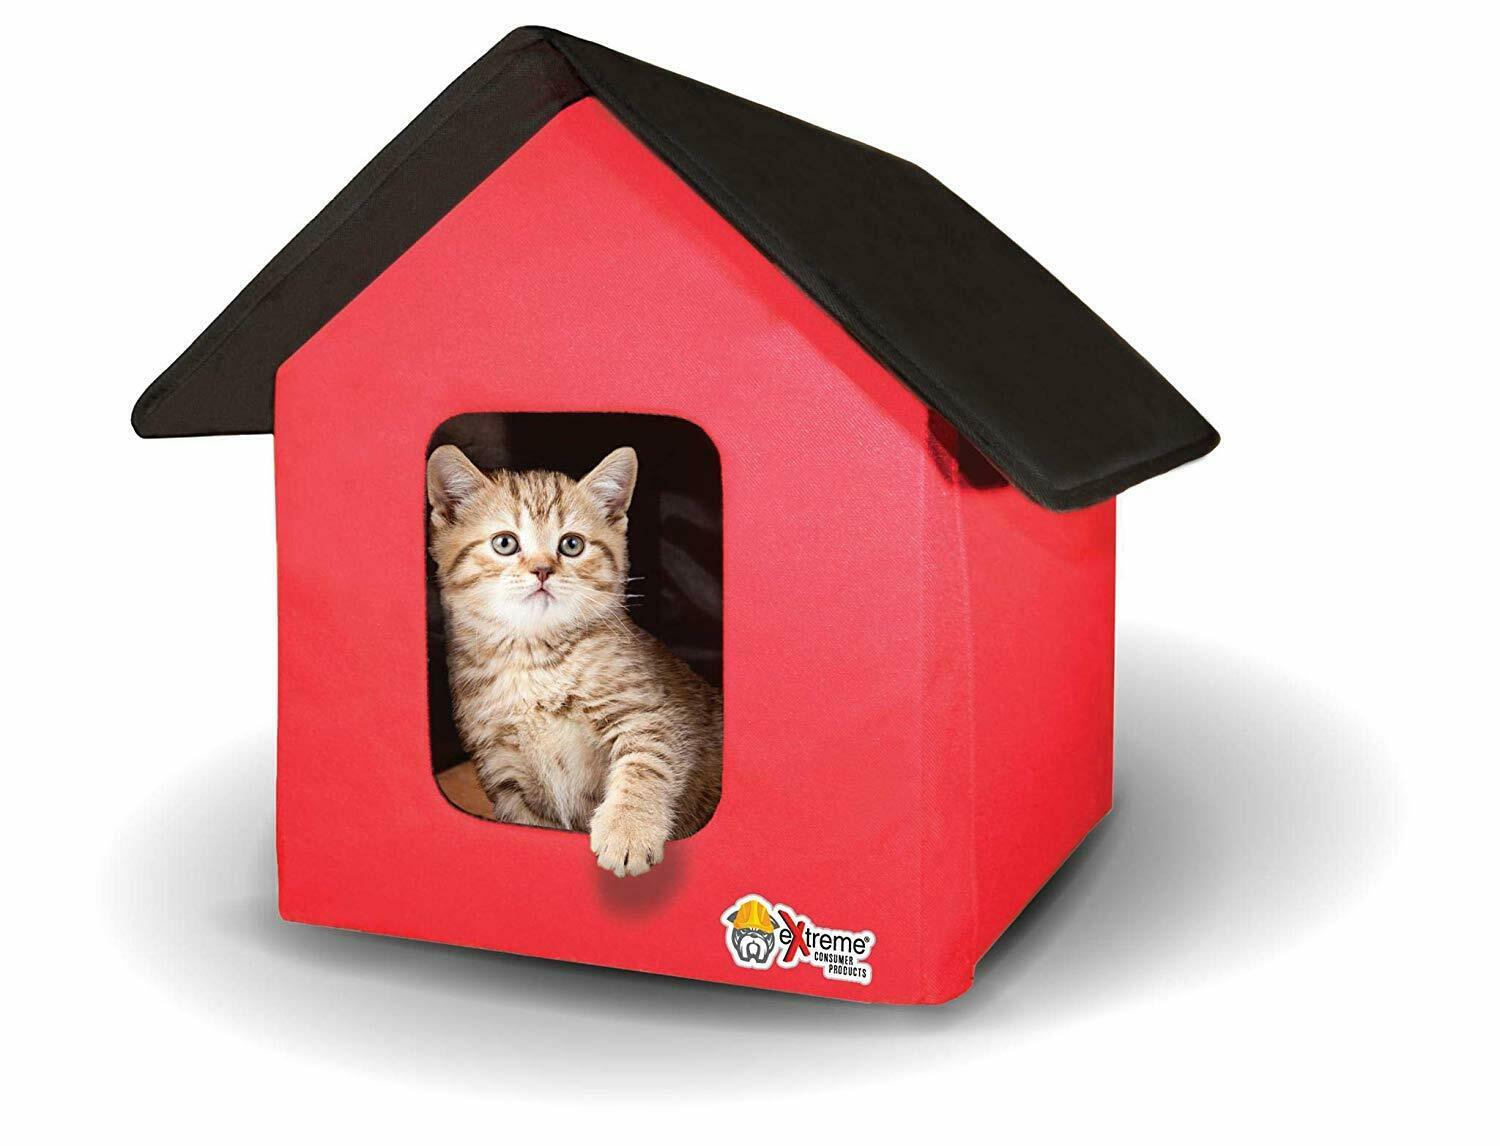 Collapsible Indoor/outdoor Pet/cat House - Heated And Standard